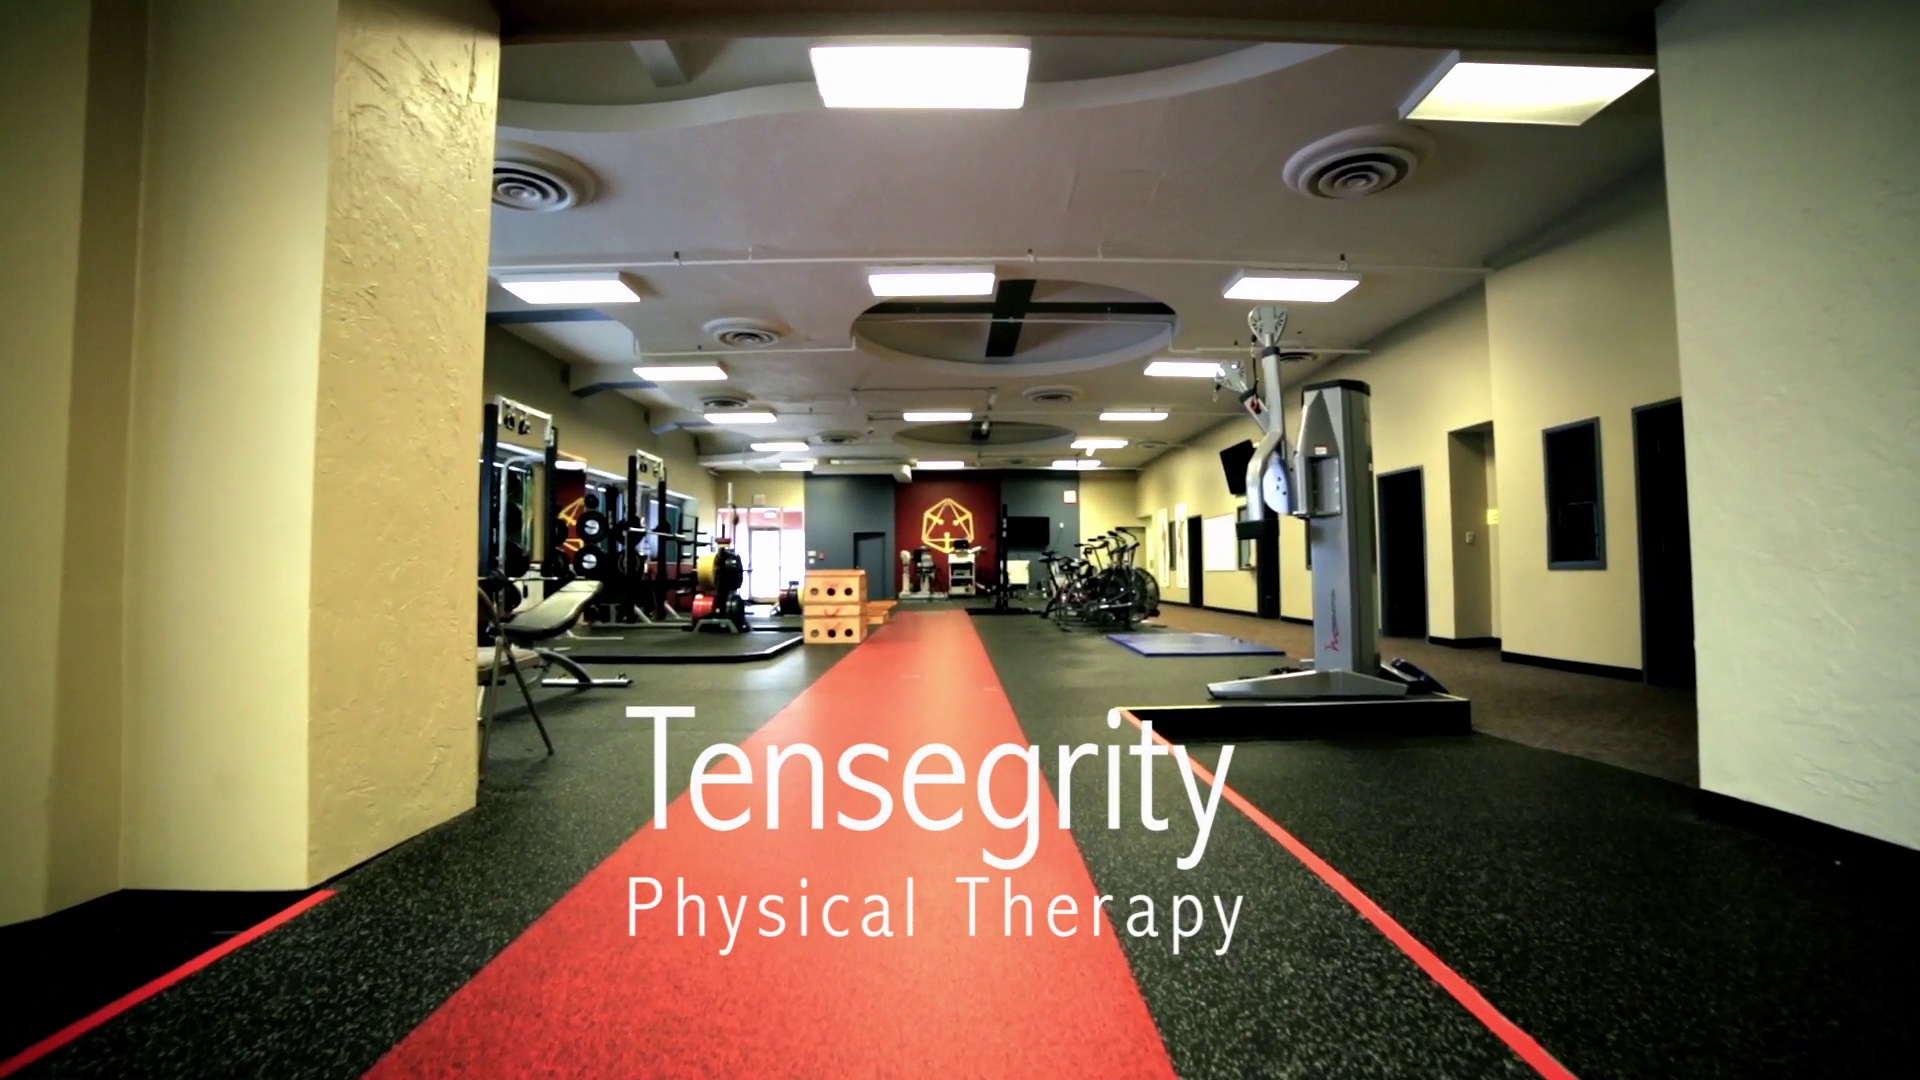 Tensegrity Physical Therapy